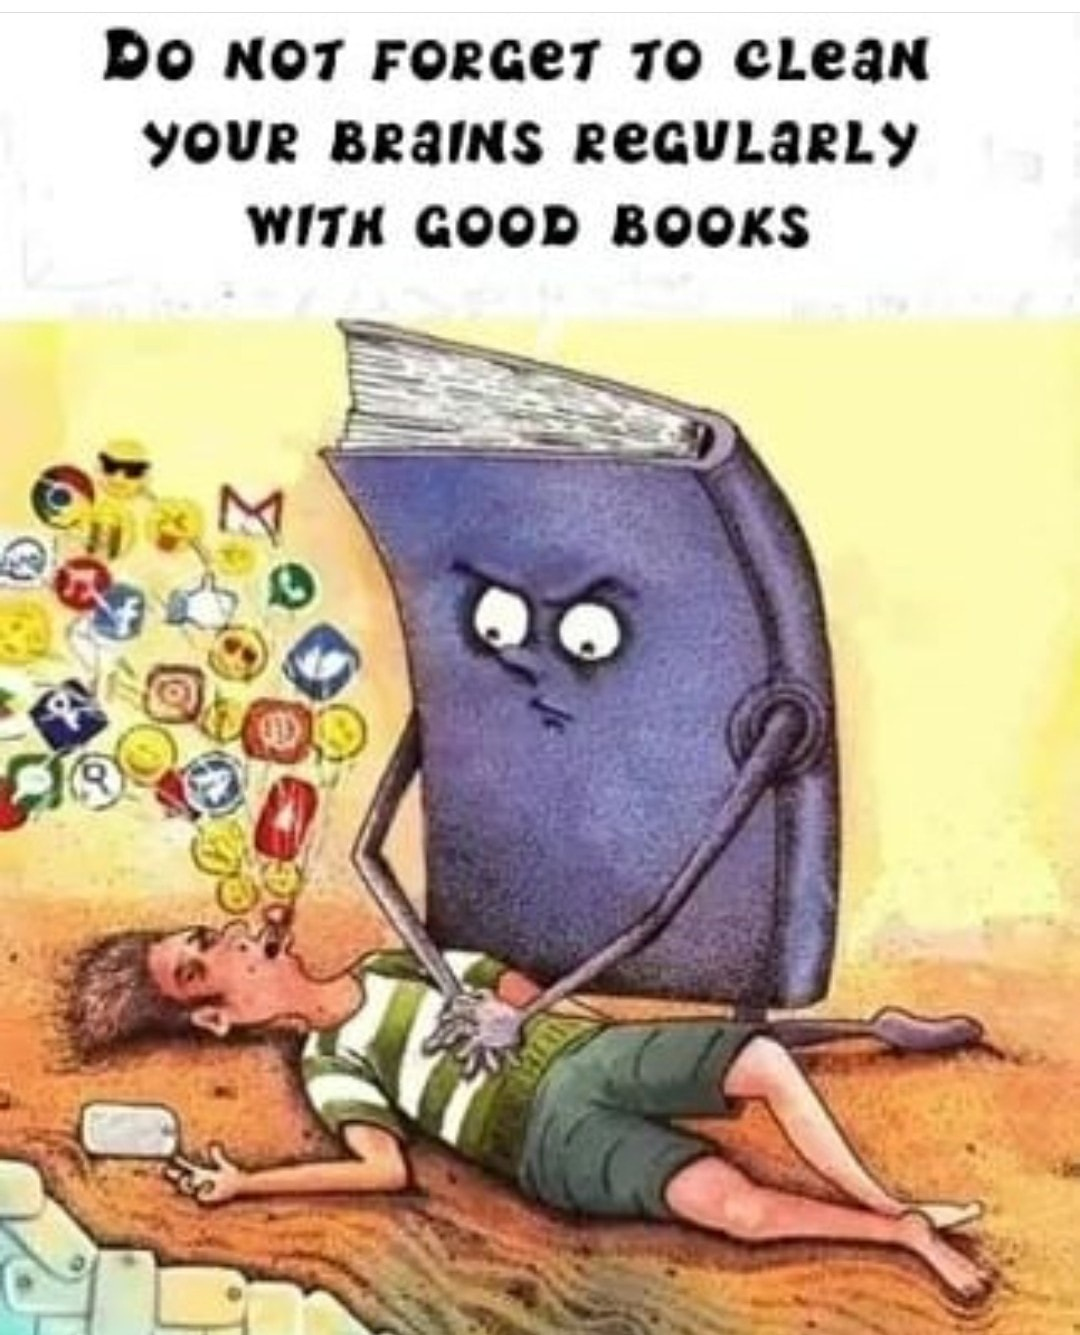 Do not forget to clean your brains regularly with good books.